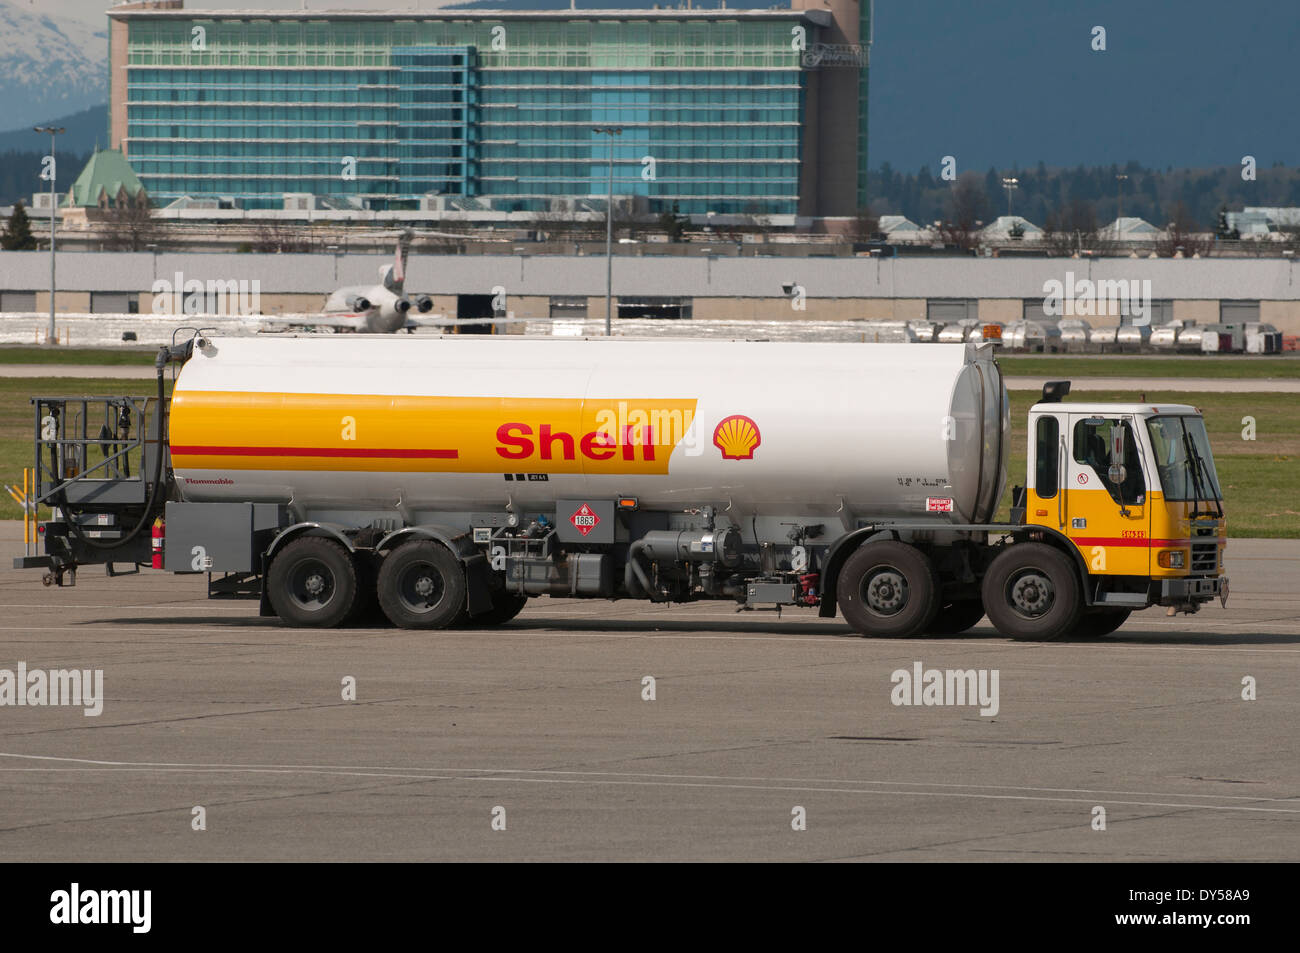 Shell mobile Jet fuel tanker on the tarmac of Vancouver International Airport. Stock Photo